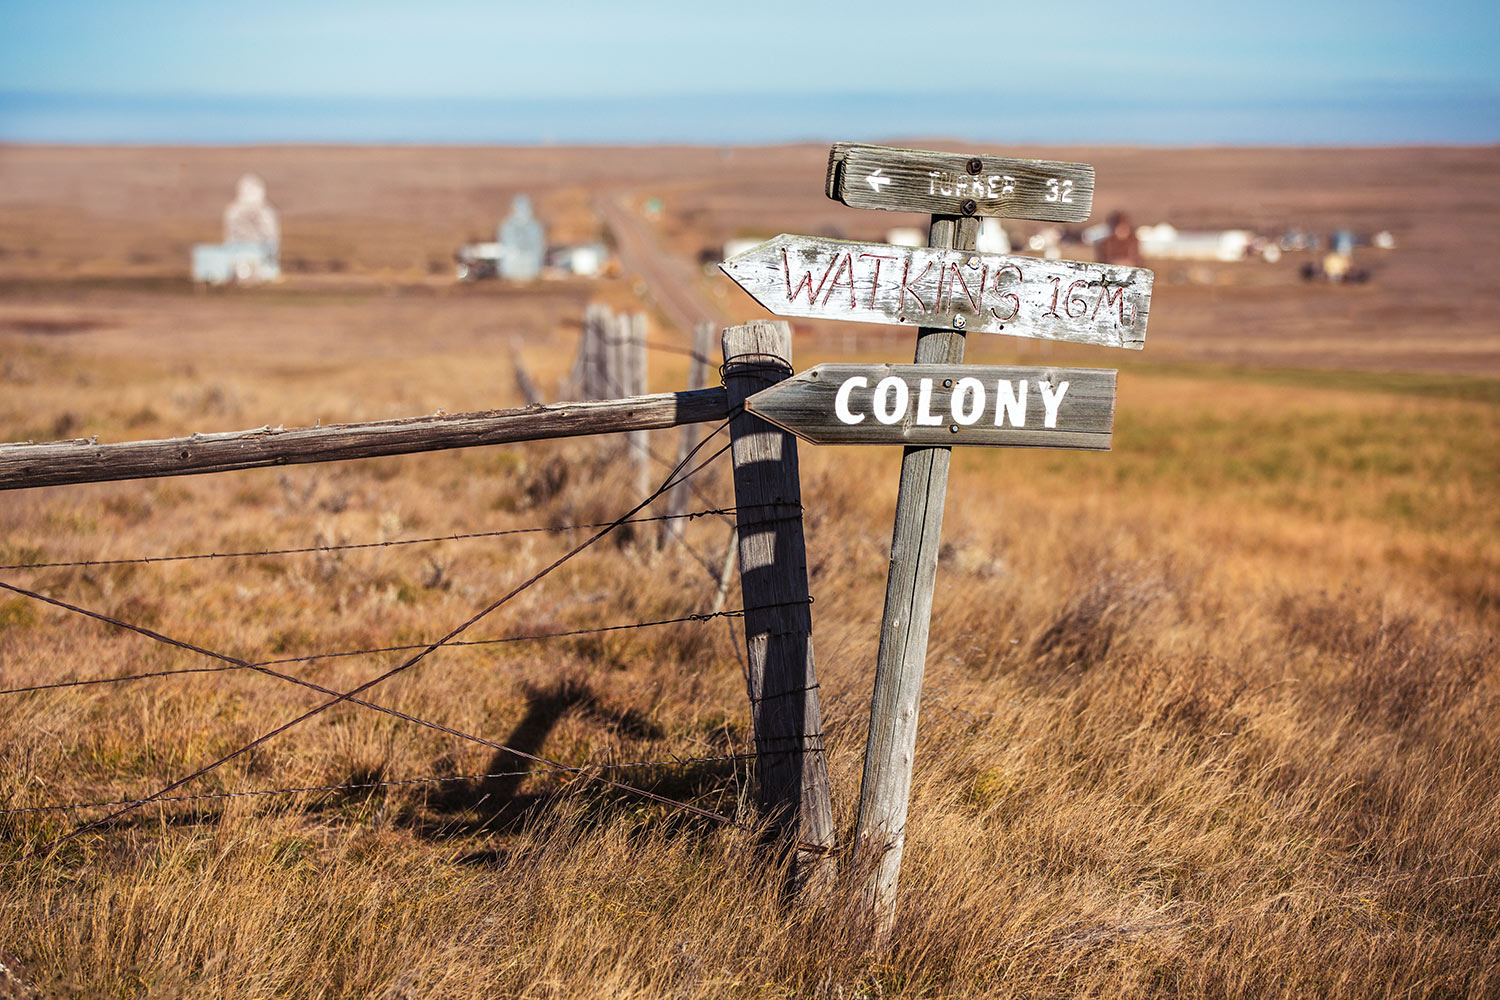 An old sign post stands alone on the quiet plains outside of Loring, Montana pointing the way to Turner, Watkins, and the Loring Hutterite Colony.&nbsp;→ Buy a Print